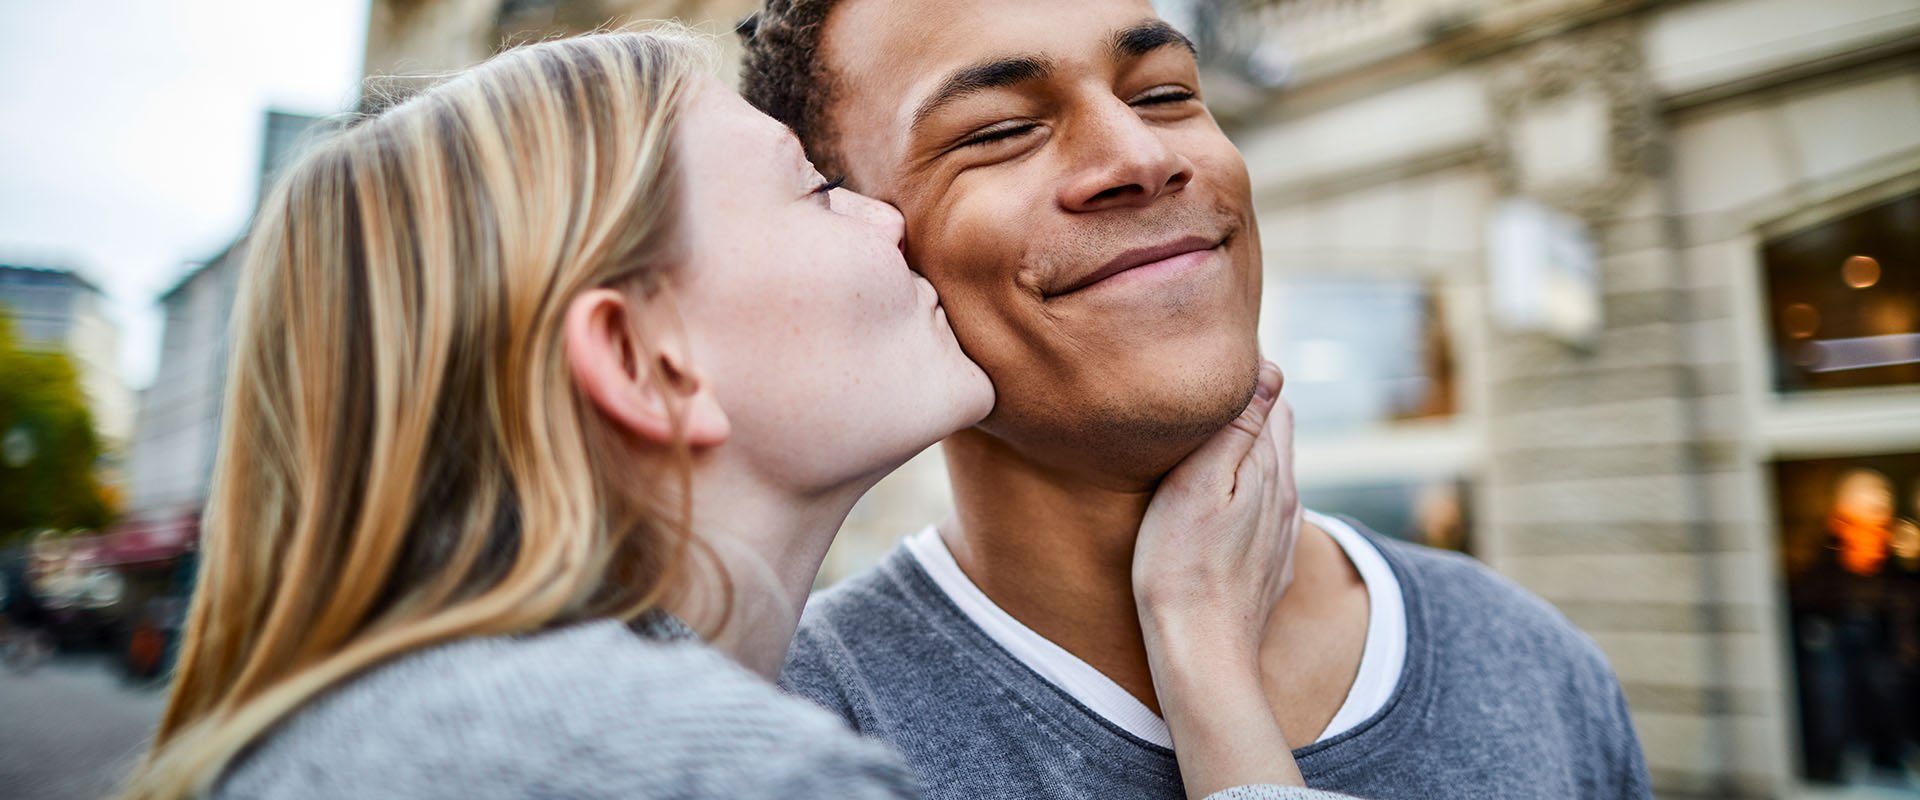 How To Kiss Her Confidently On The First Date